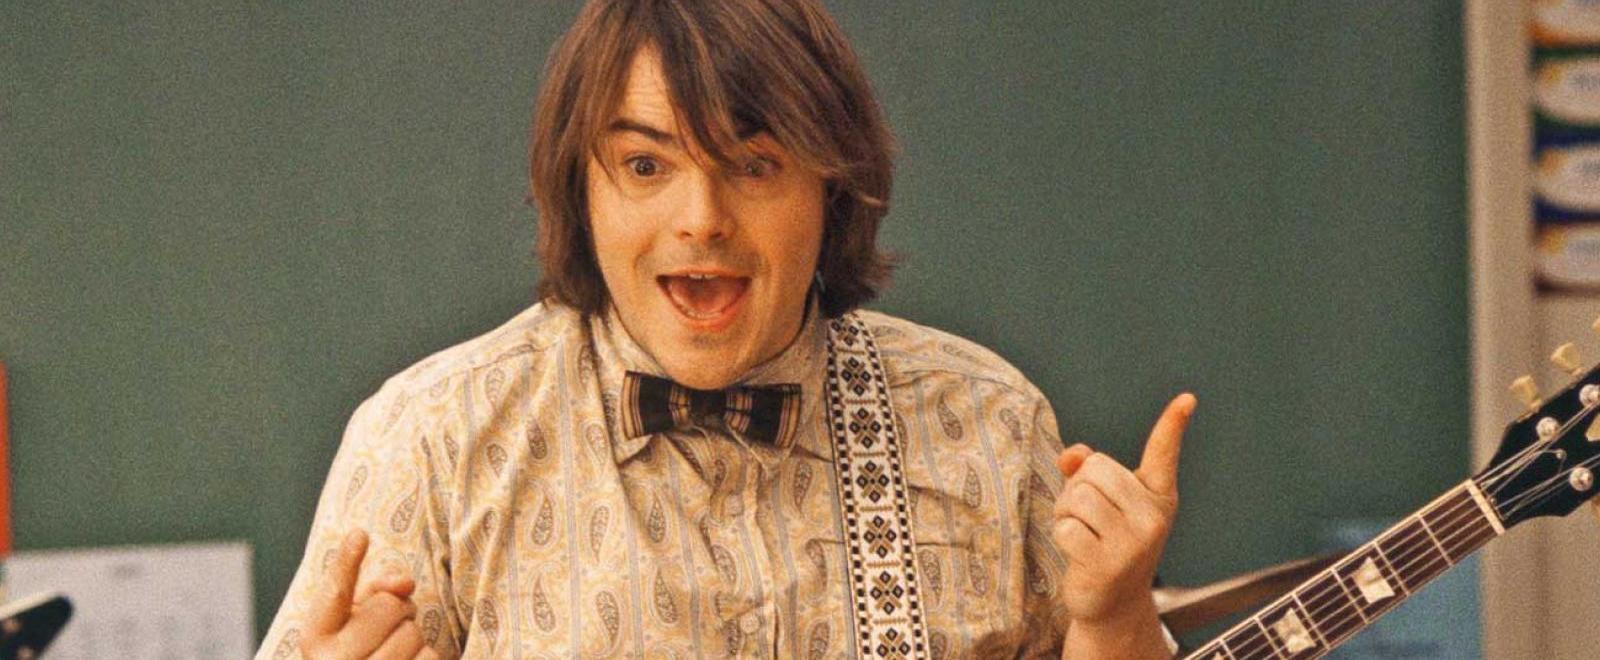 Jack Black Confirms 'School of Rock' Cast Will Reunite for 20th  Anniversary: 'All Those Kids… Now They're 30 Years Old